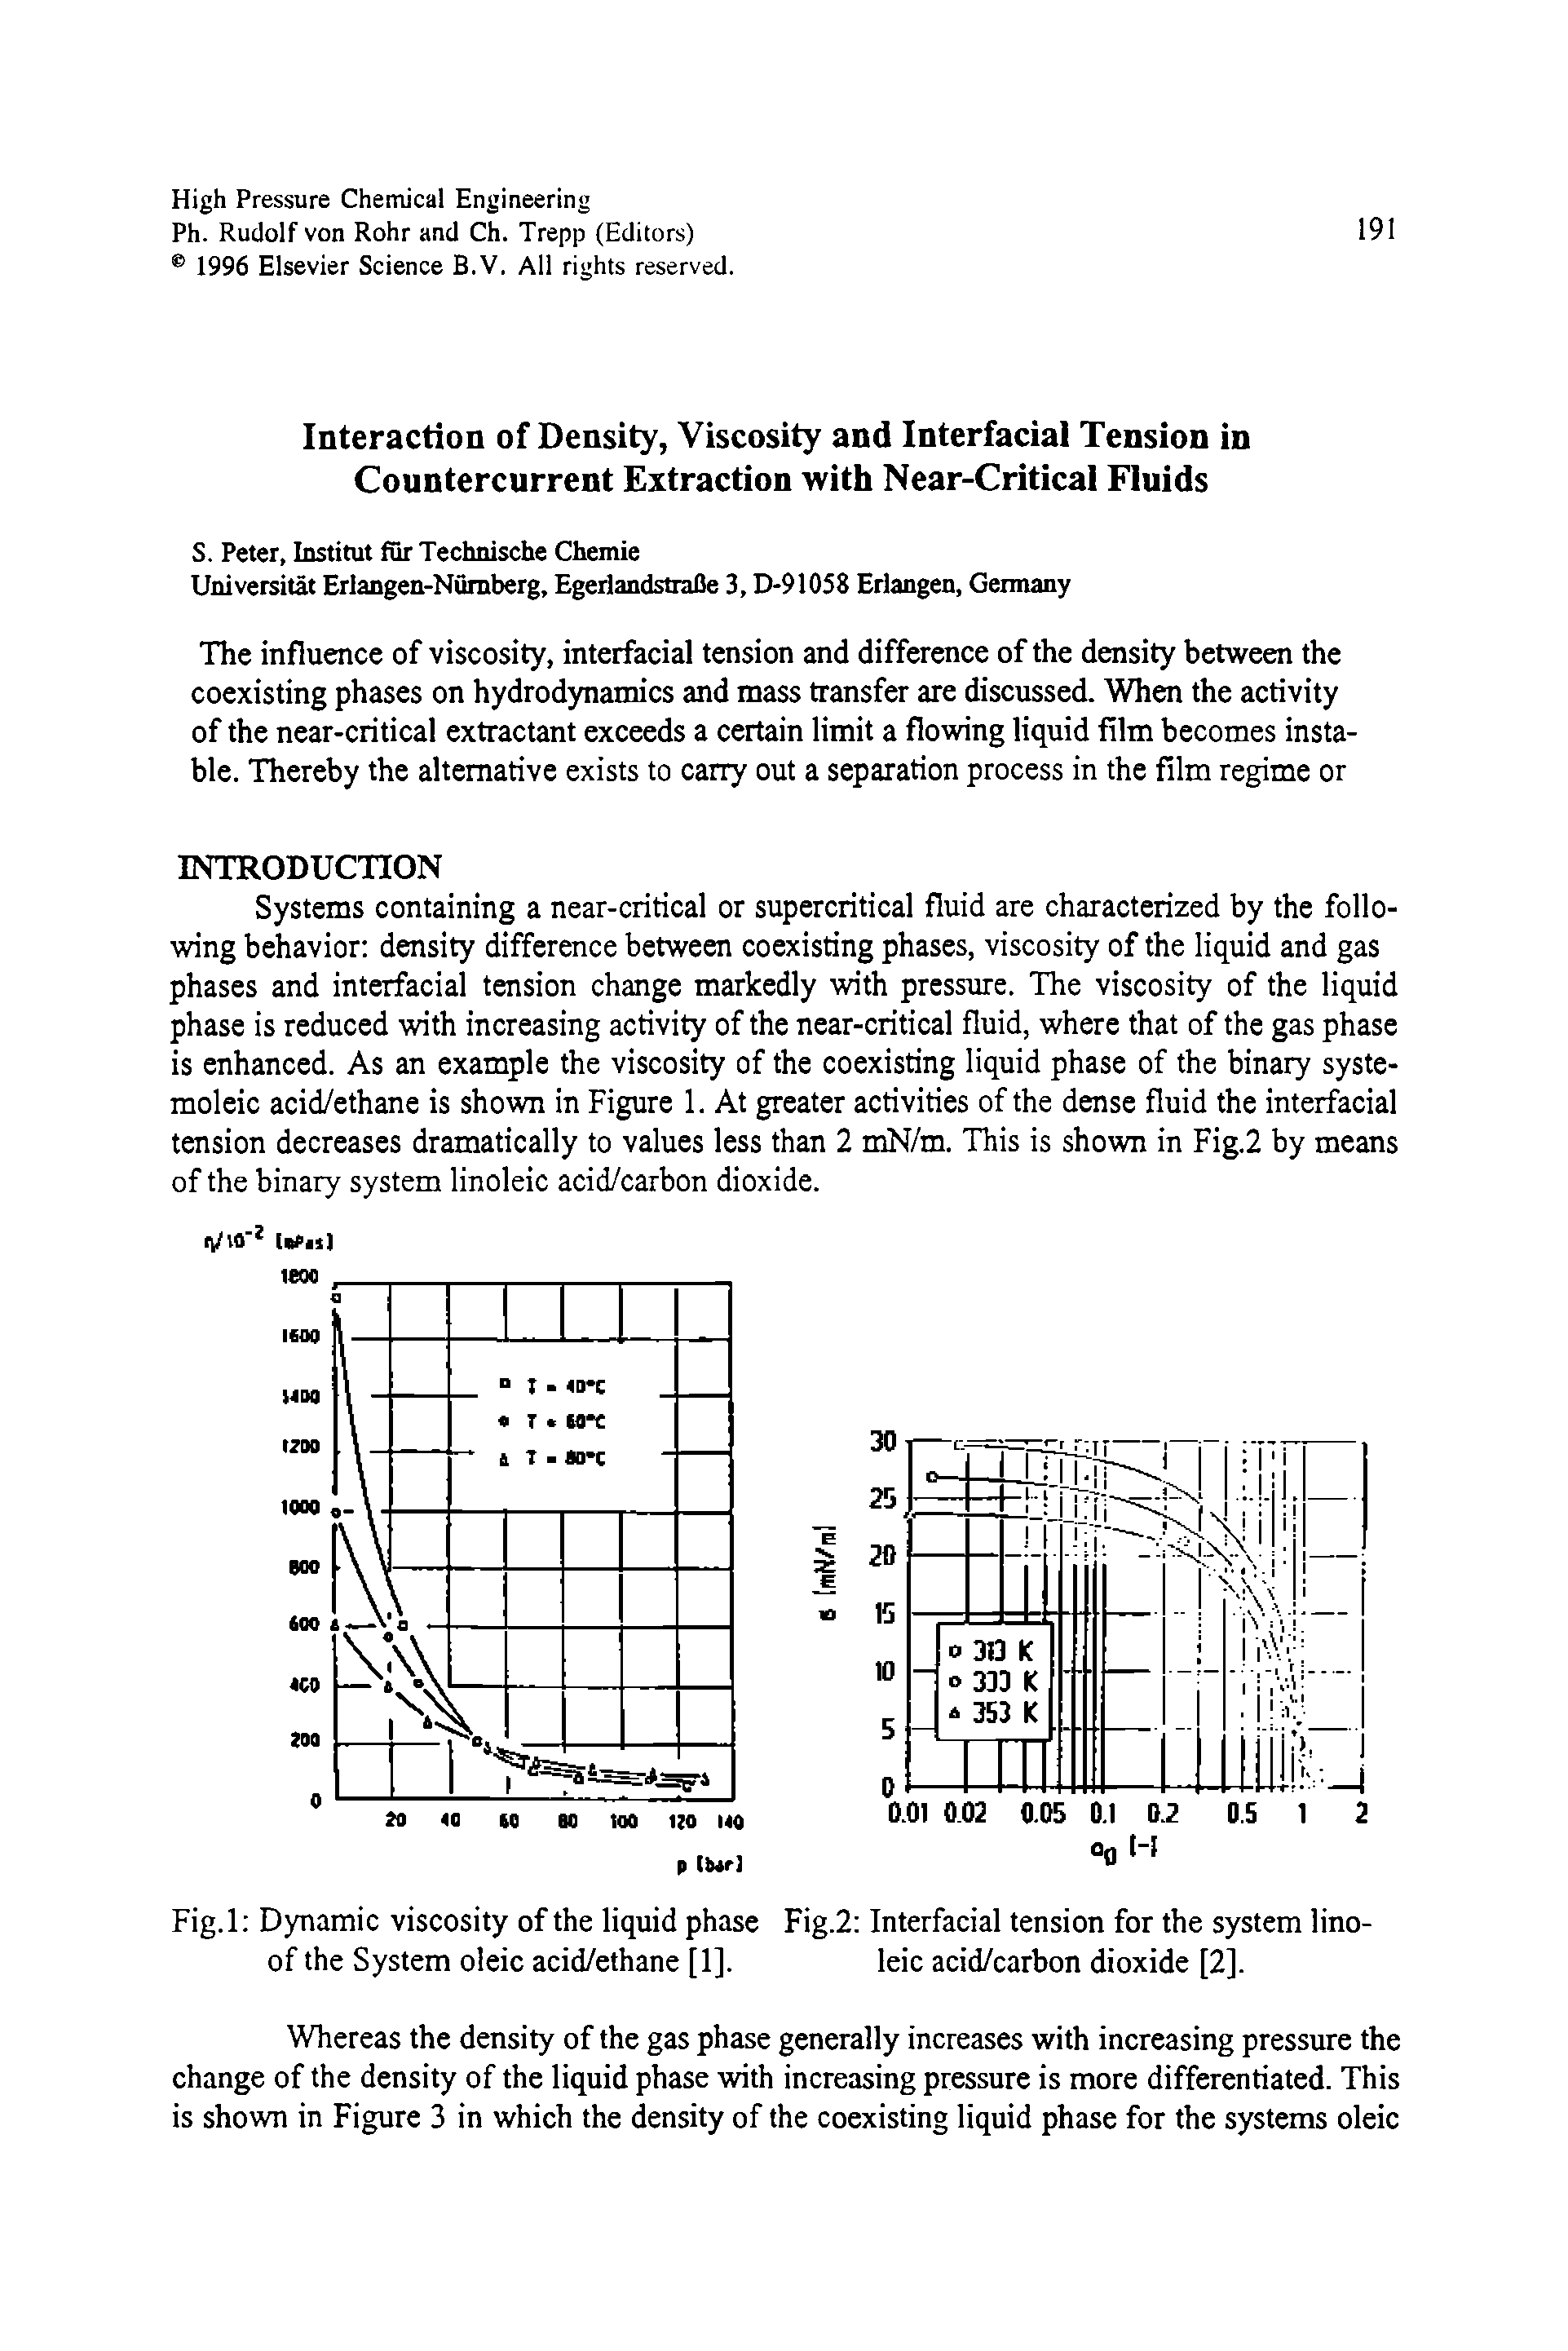 Fig.l Dynamic viscosity of the liquid phase Fig.2 Interfacial tension for the system lino-of the System oleic acid/ethane [1], leic acid/carbon dioxide [2].